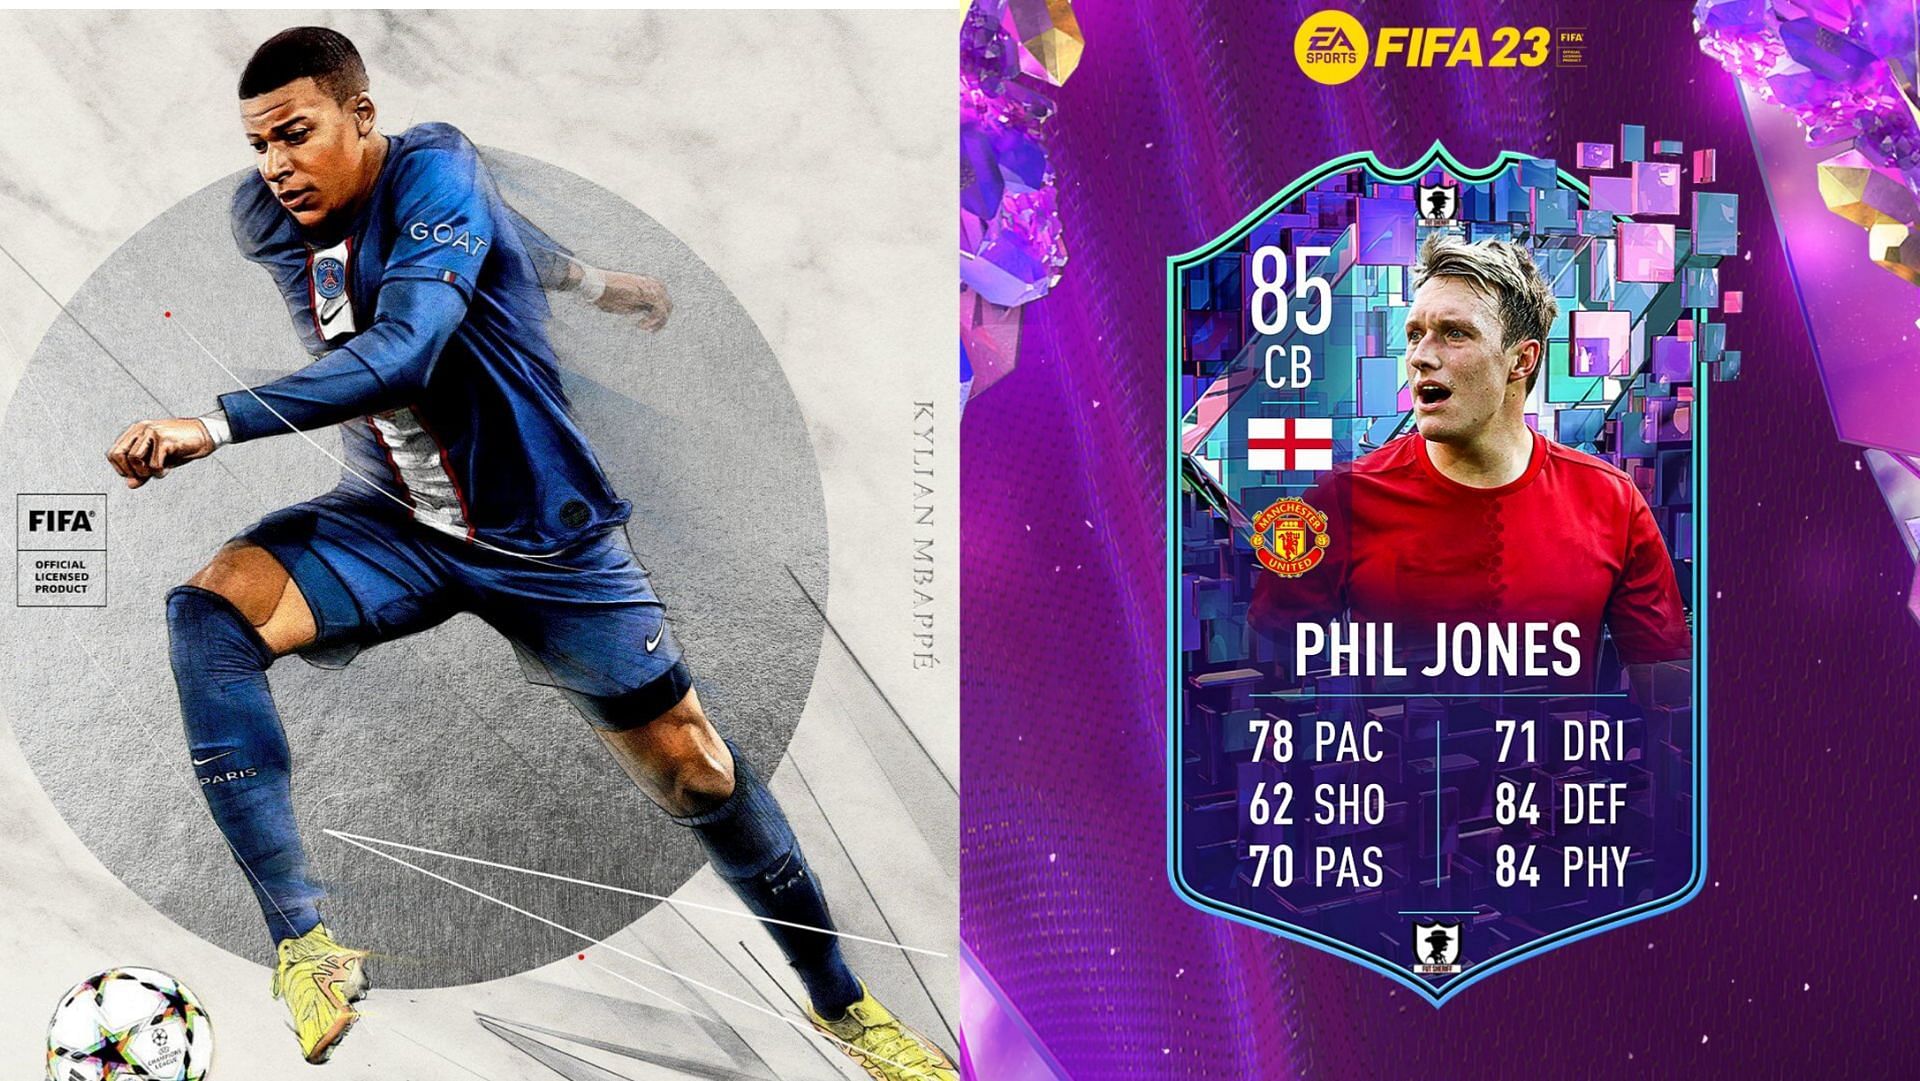 FIFA 23 players could have some usage for the leaked Phil Jones Flashback SBC card in Ultimate Team (Images via EA Sports, Twitter/FUT Sheriff)